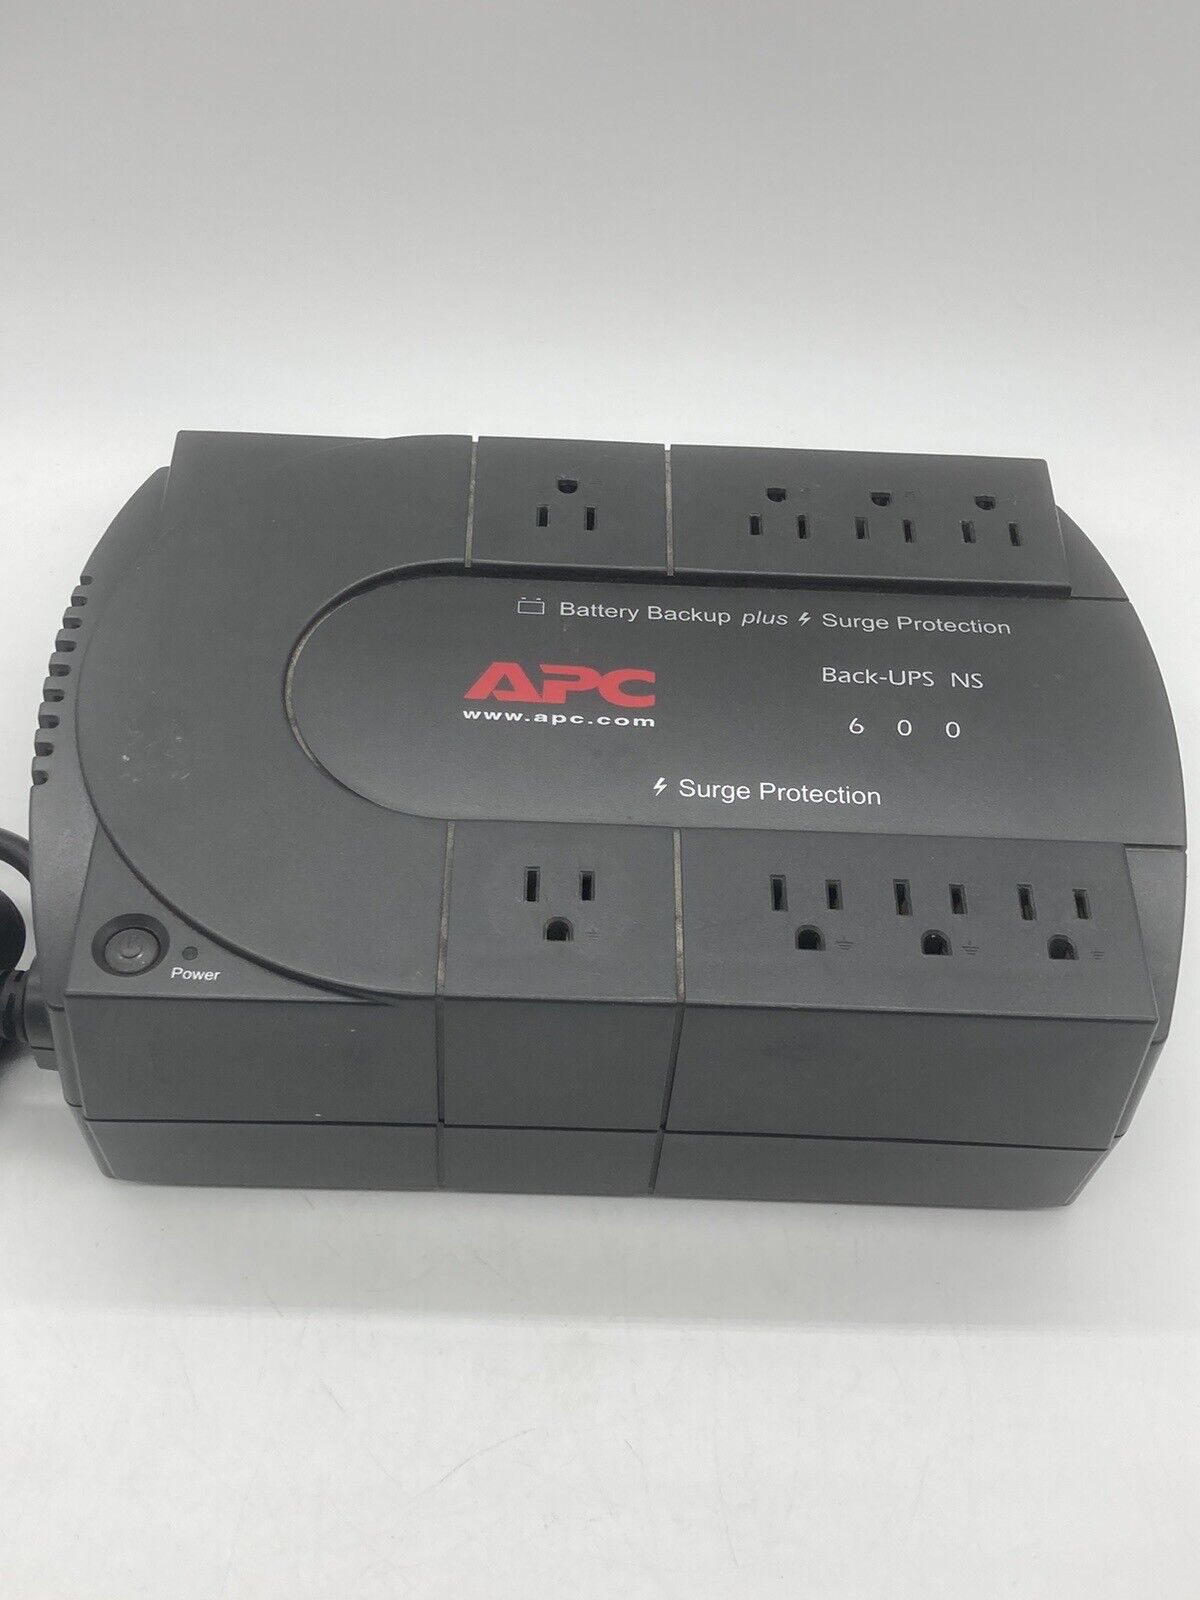 APC Battery Backup plus Surge Protection Back-UPS NS 600 BN600R Tested Works